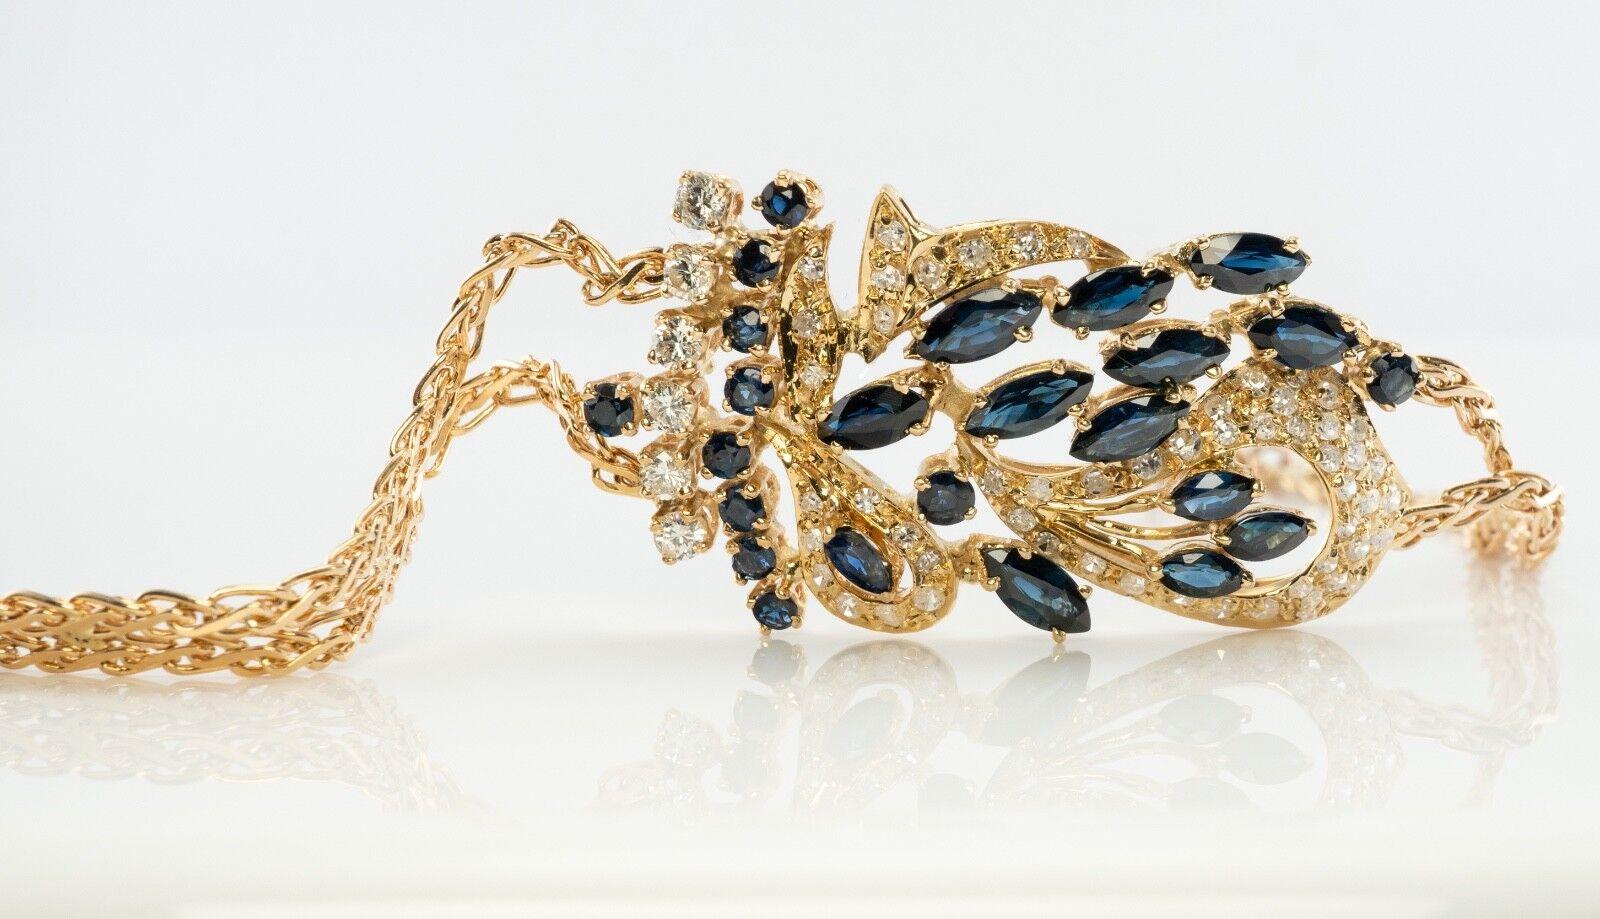 Diamond Sapphire Bracelet 18K Yellow & Rose Gold

This terrific estate bracelet is finely crafted in solid 18K Yellow Gold and Rose gold for the clasp and set with genuine Earth mined Sapphires and Diamonds. There are twelve round cut Sapphires and